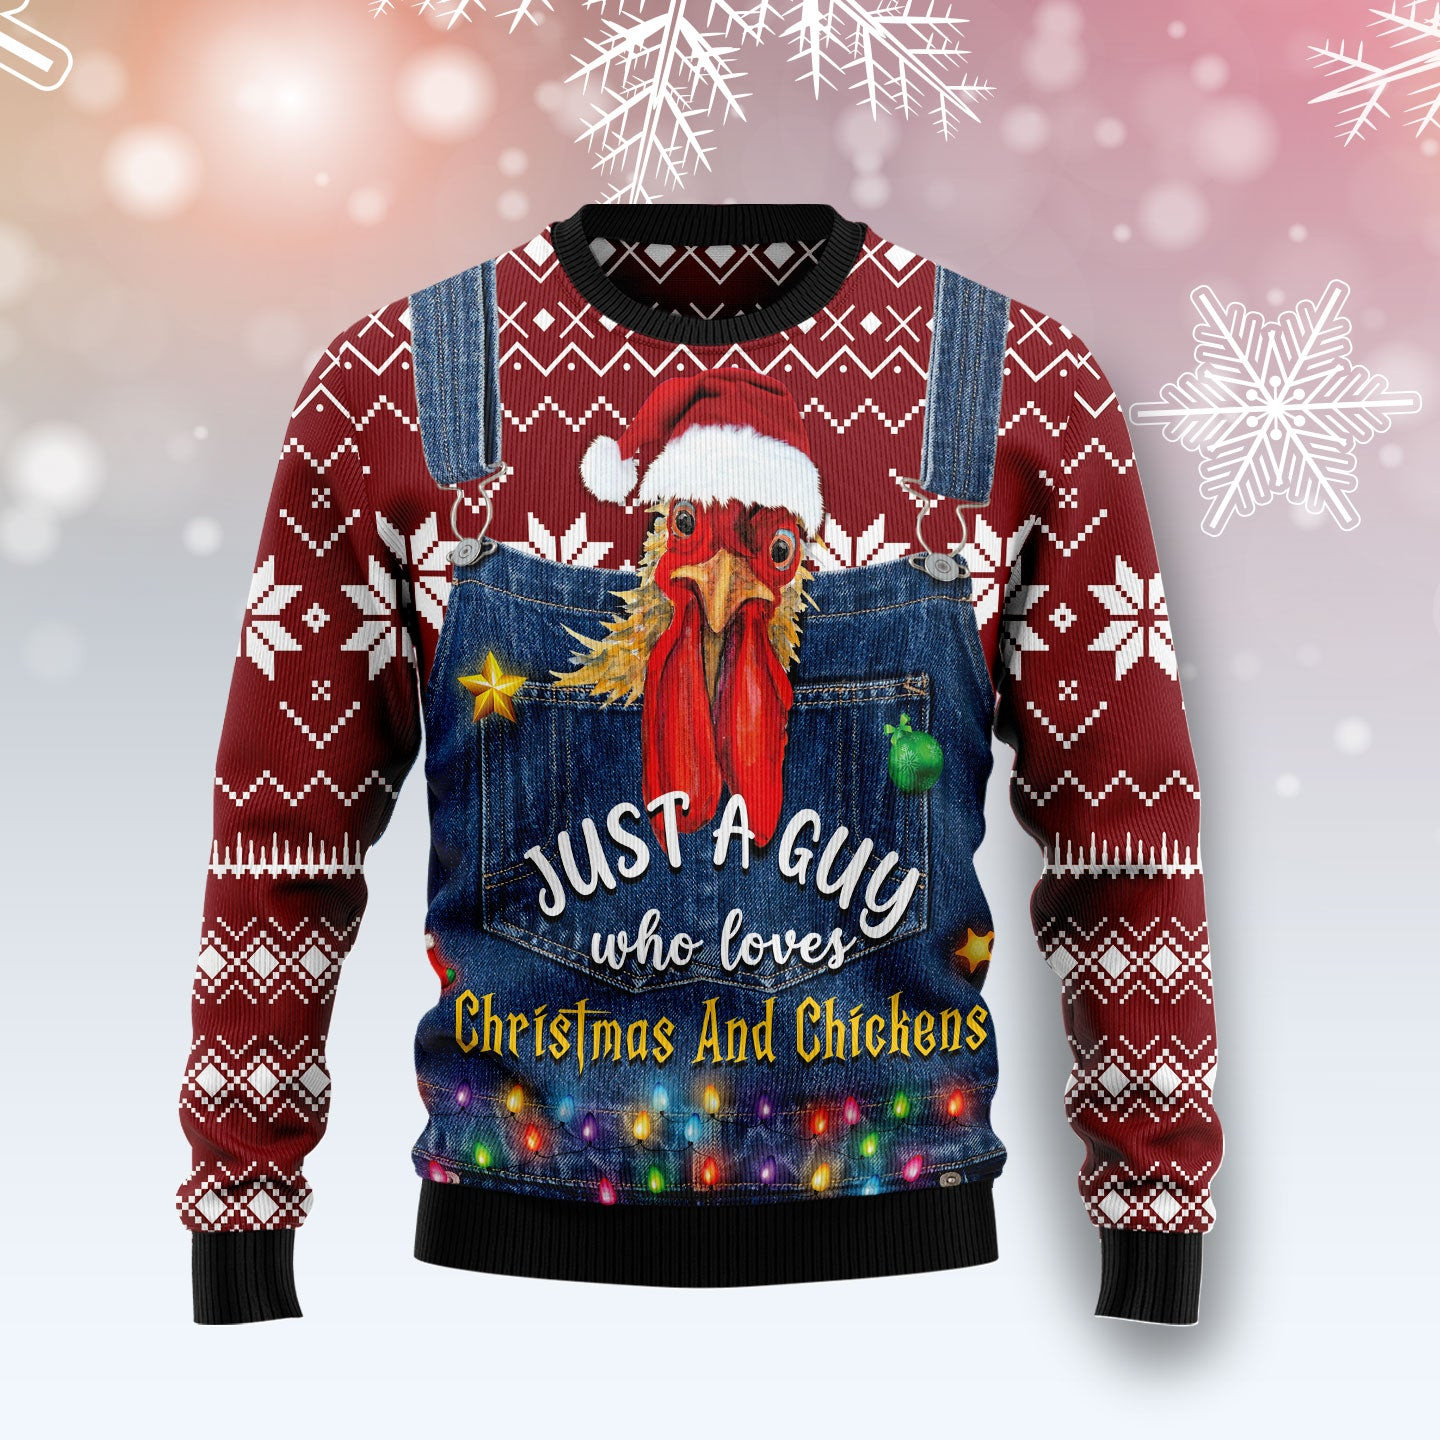 Just A Guy Who Loves Christmas And Chickens Ugly Christmas Sweater